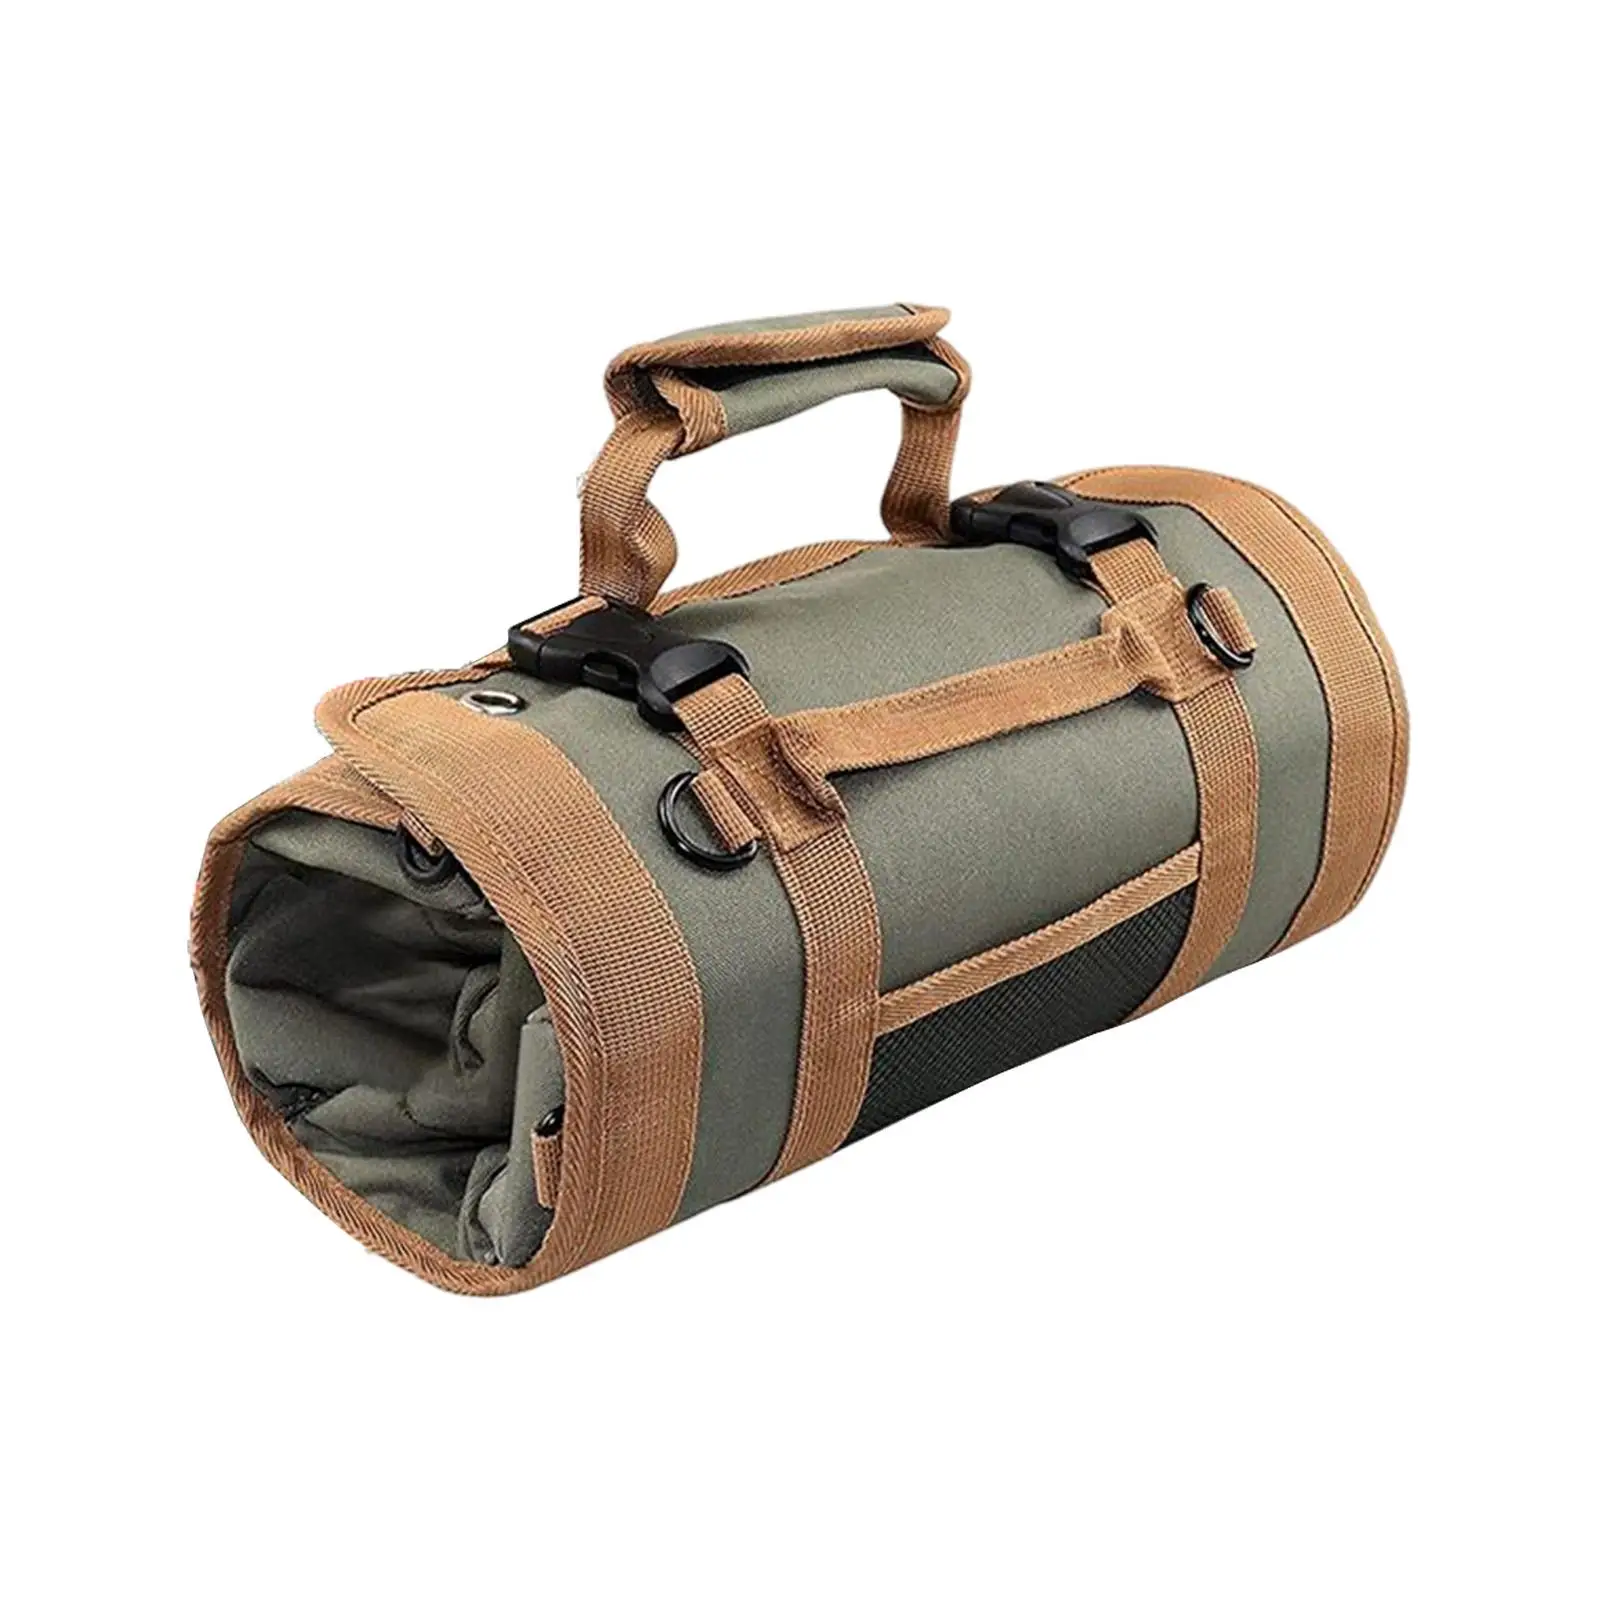 Portable Small Tool Pouches Roll up Multipurpose Large Capacity Electrician Kit Organizer for Hiking Home Outdoor Father Gifts